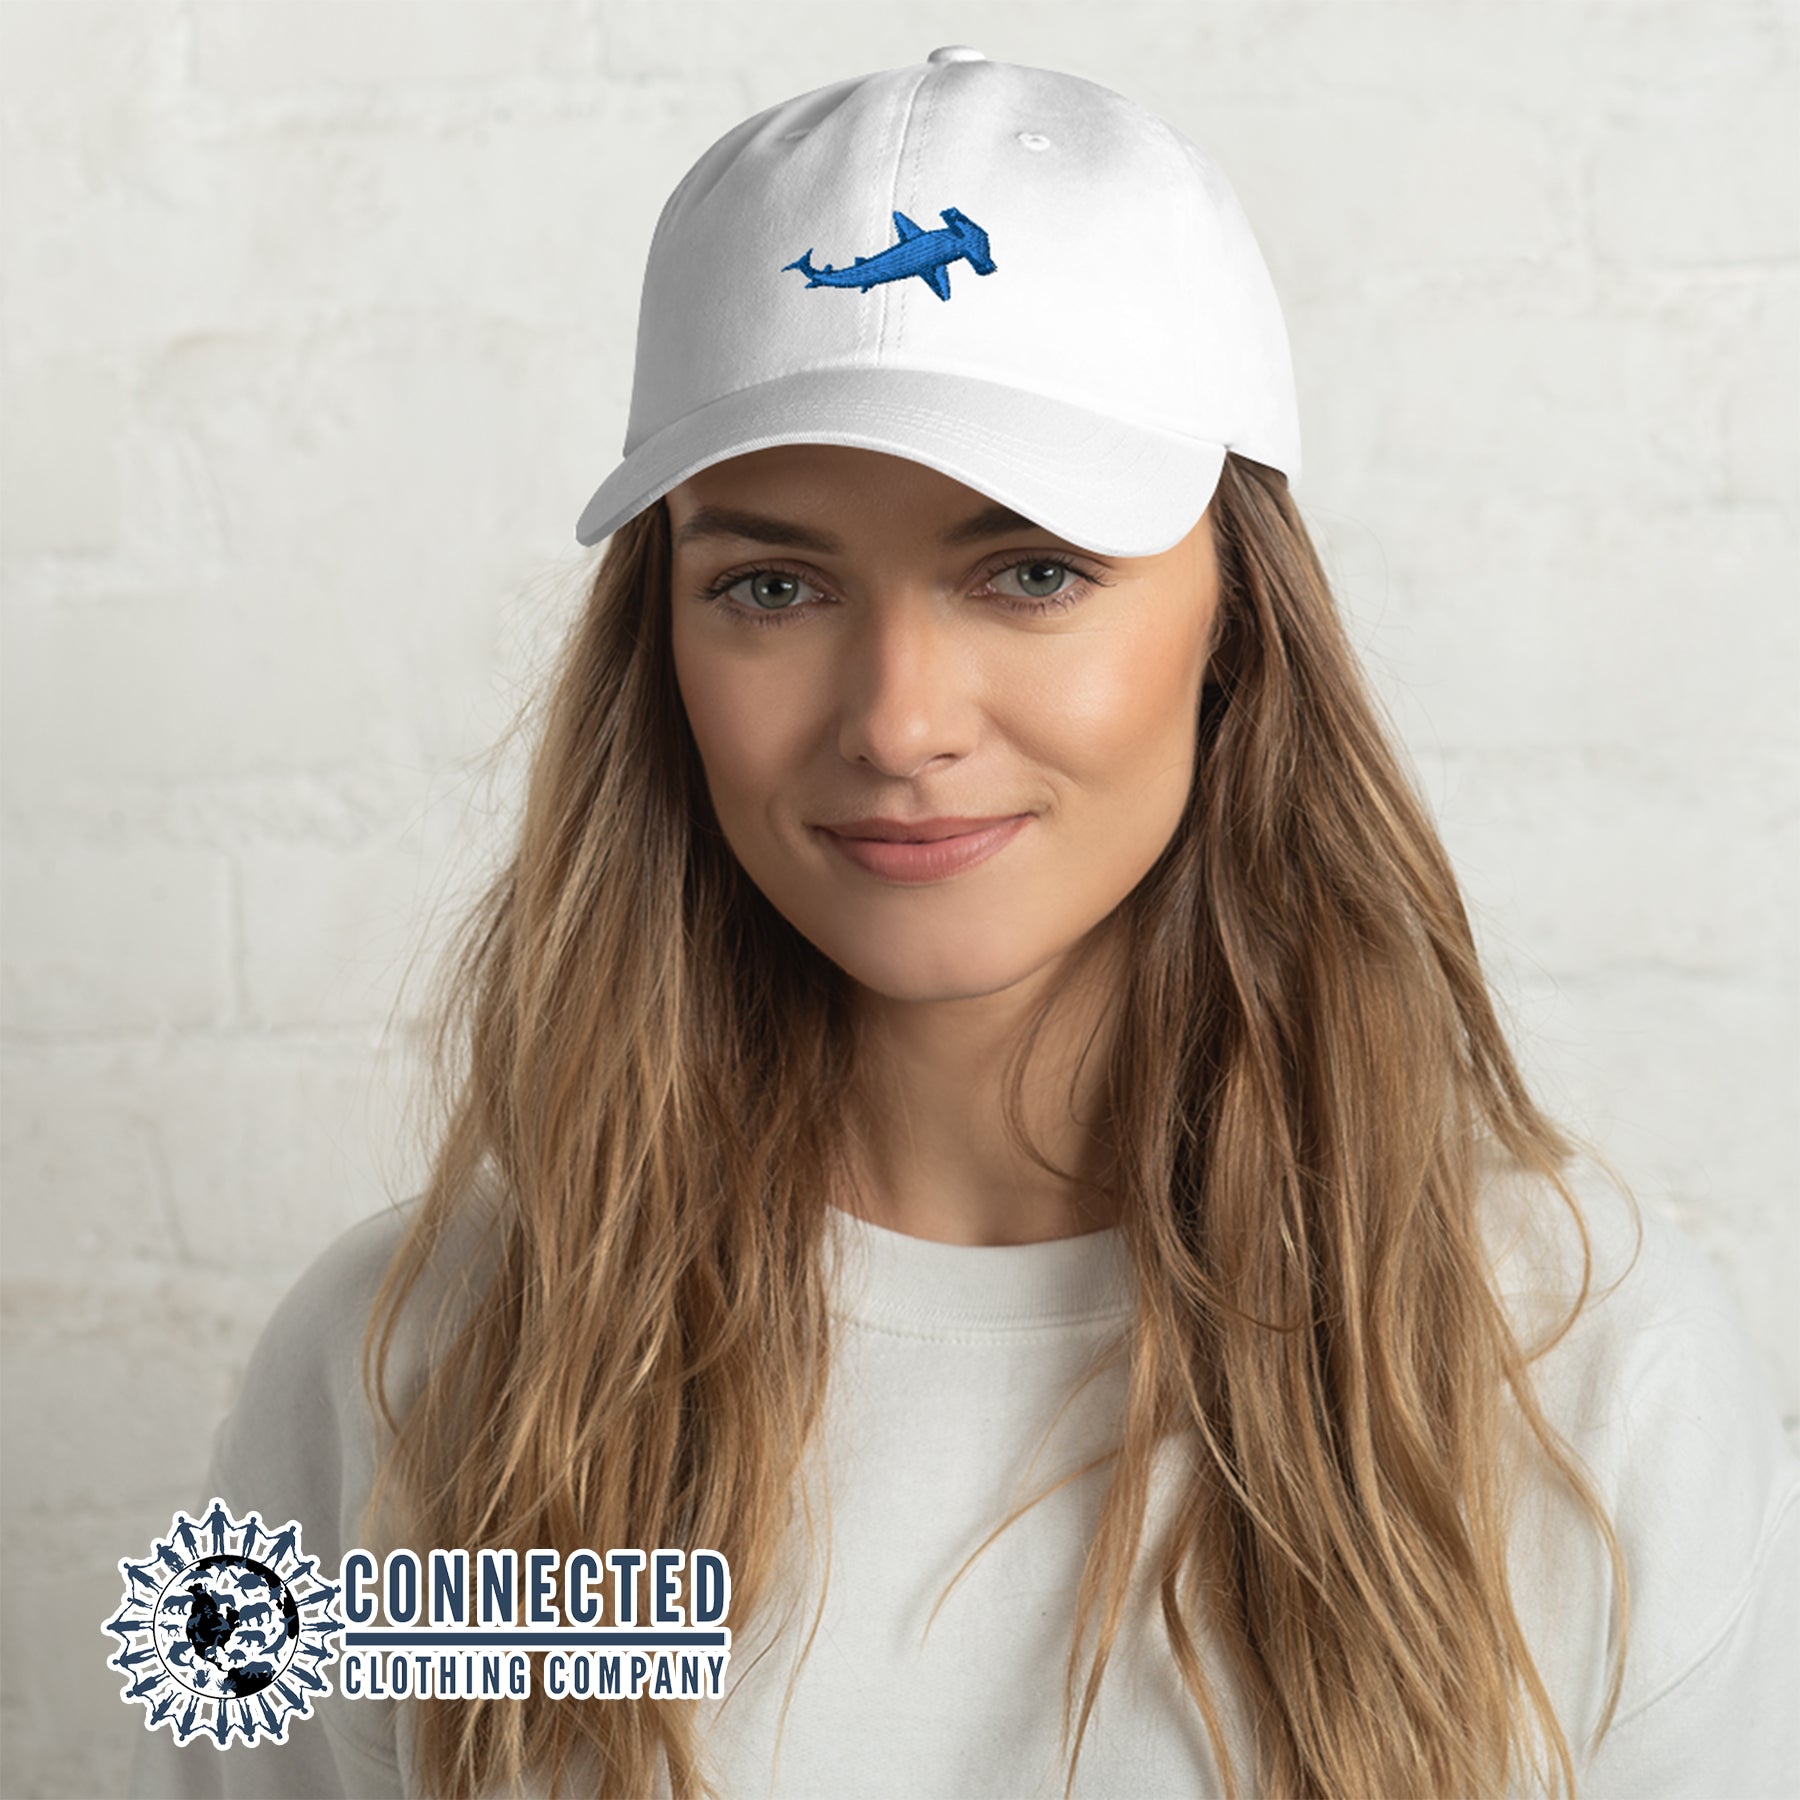 Model Wearing White Hammerhead Shark Cotton Cap - sweetsherriloudesigns - Ethical & Sustainable Clothing That Gives Back - 10% donated to Oceana shark conservation